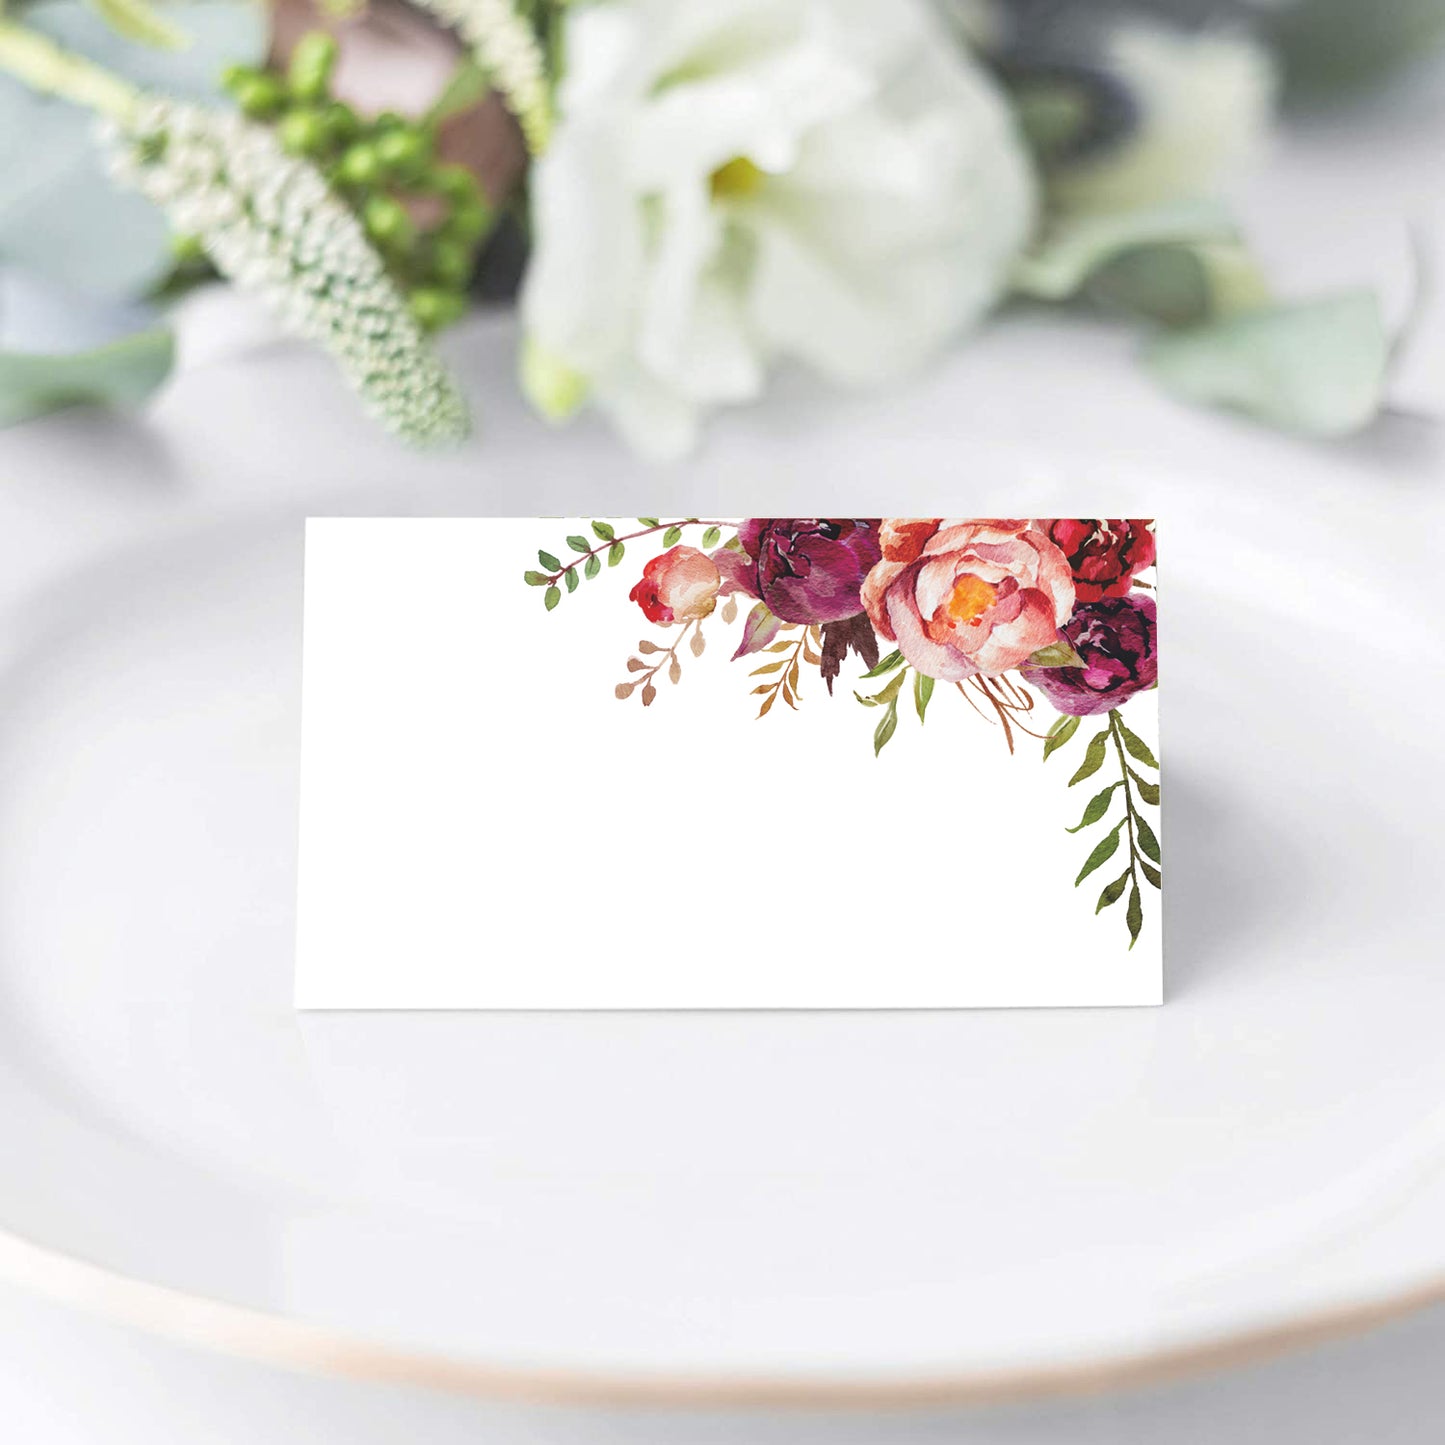 Floral Place Cards for Wedding or Party, Seating Place Cards for Tables, Scored for Easy Folding, Burgundy Flower Design, 2 x 3.5 Inches